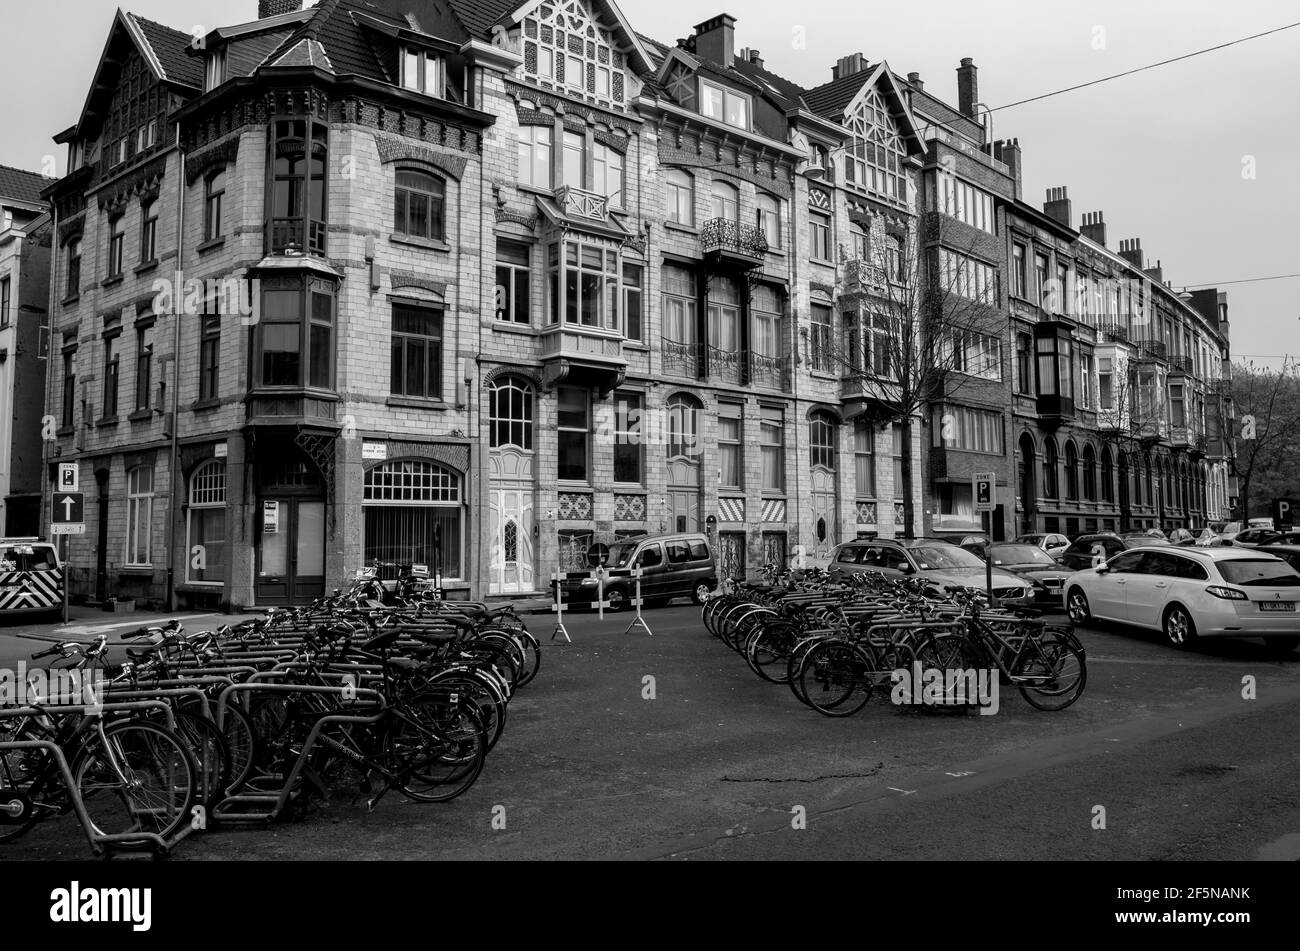 Rows of bicycles parked outside a handsome old building in Koningin Astridlaan, near Citadel Park in Ghent, Belgium. B&W Stock Photo